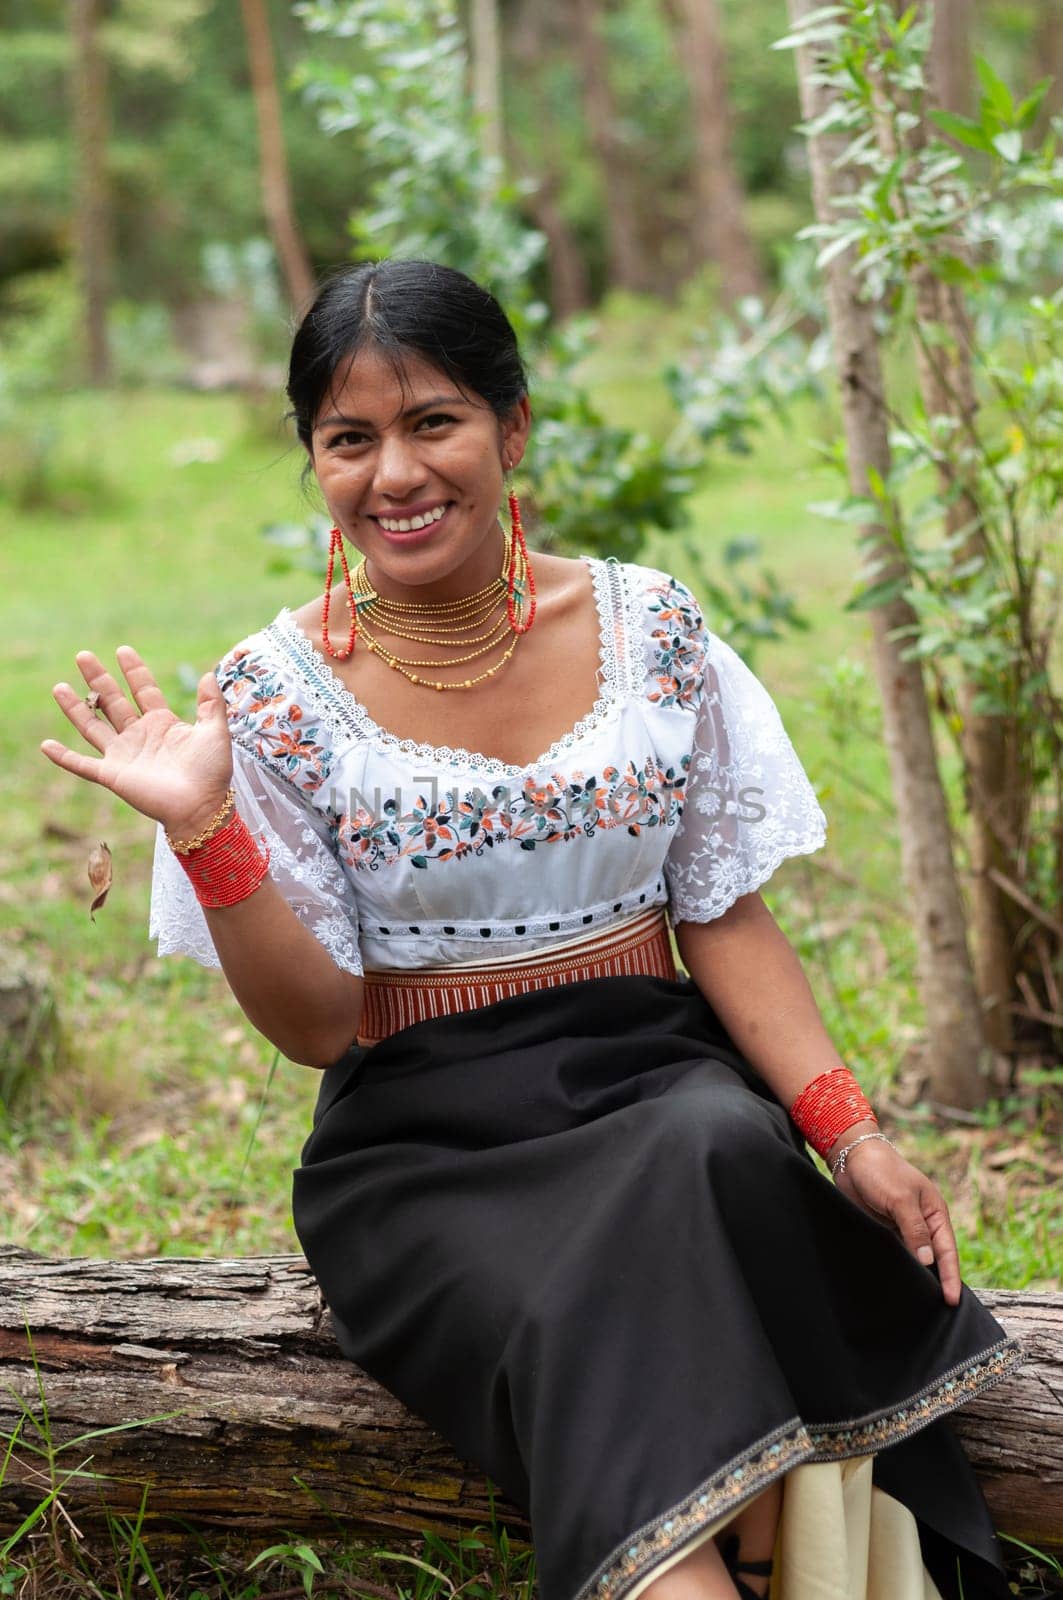 sweet indigenous woman from ecuador sitting on a fallen tree in a forest smiling and waving to the camera. by Raulmartin